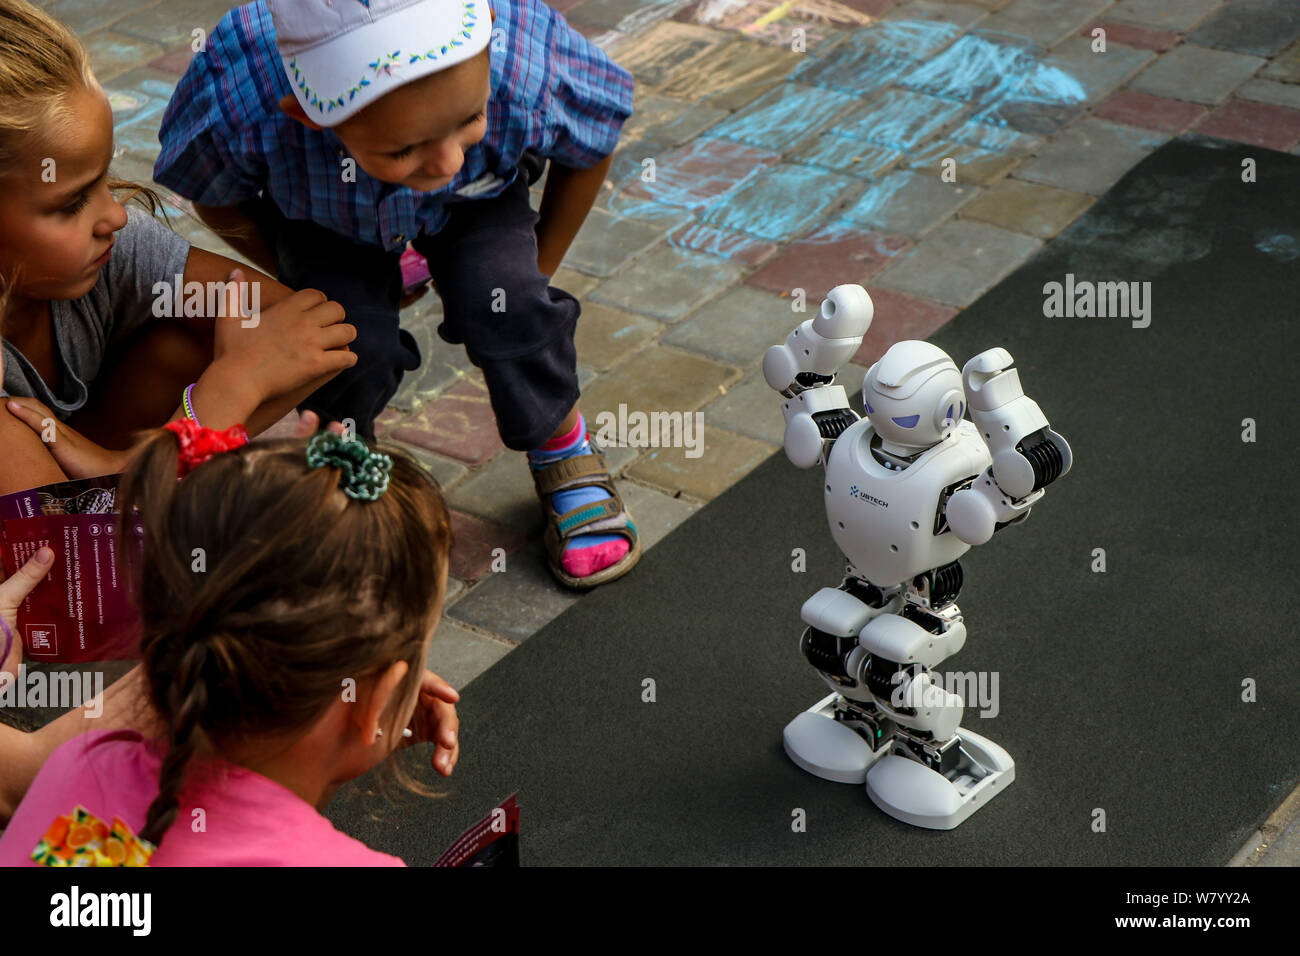 Kremenchuk, Ukraine - 3.08.2019: Demonstration of high technology of the future, The Smart UBTECH Humanoid Robot surrounded by children, horizontal or Stock Photo